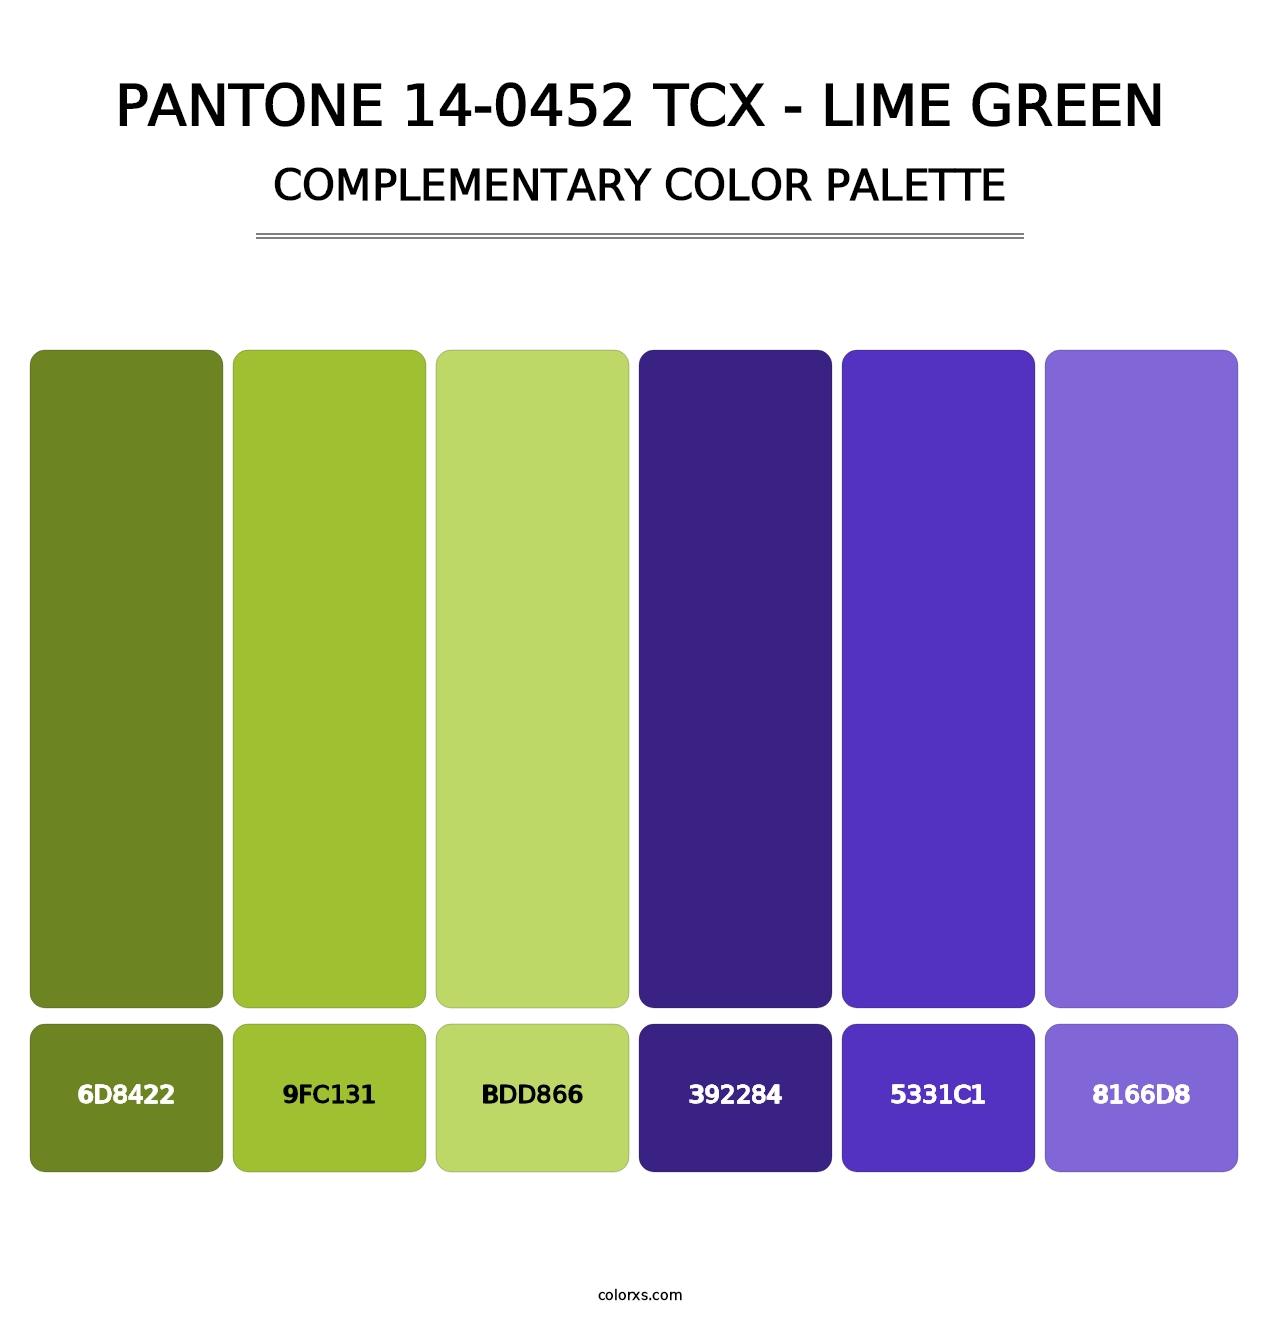 PANTONE 14-0452 TCX - Lime Green - Complementary Color Palette